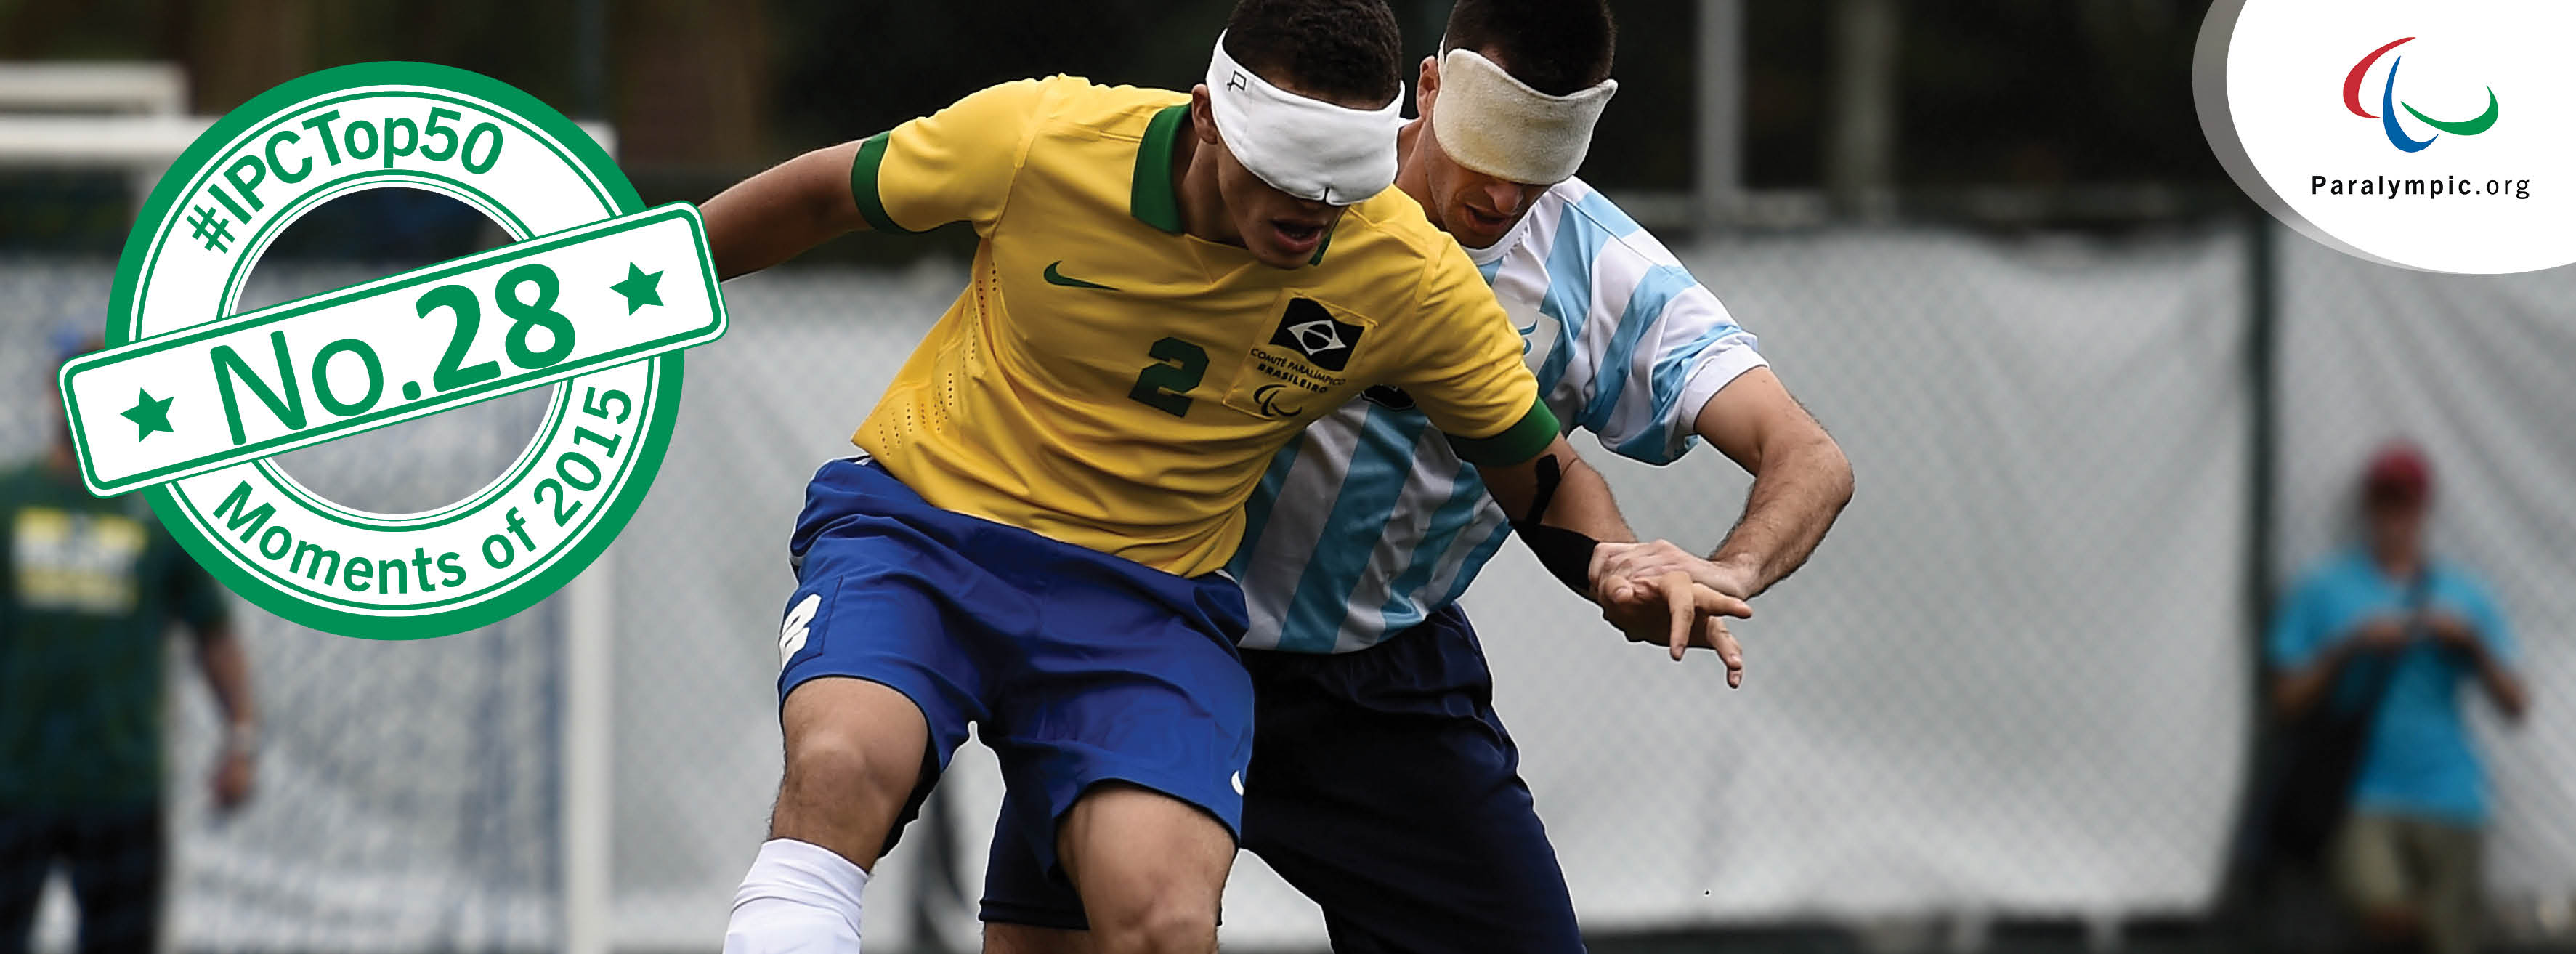 Top 50 moments 2015 - No. 28 Brazil, Argentina clash in Toronto 2015 final